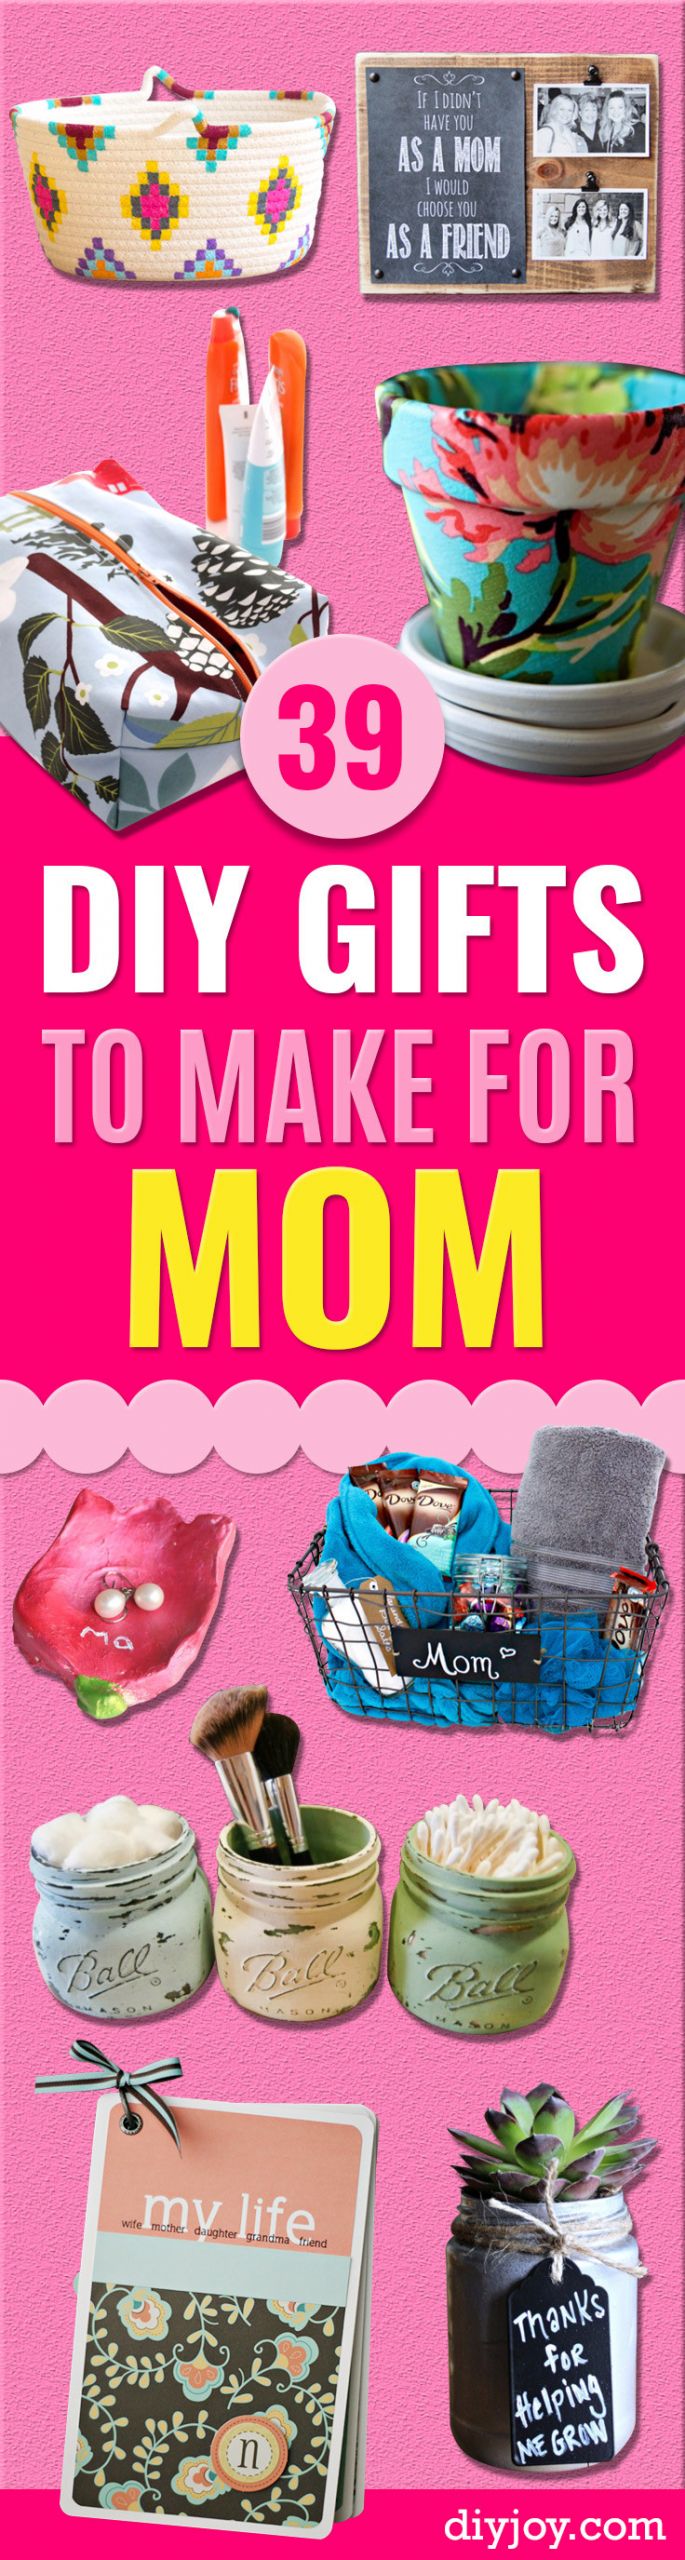 DIY Gift For Your Mom
 39 Creative DIY Gifts to Make for Mom